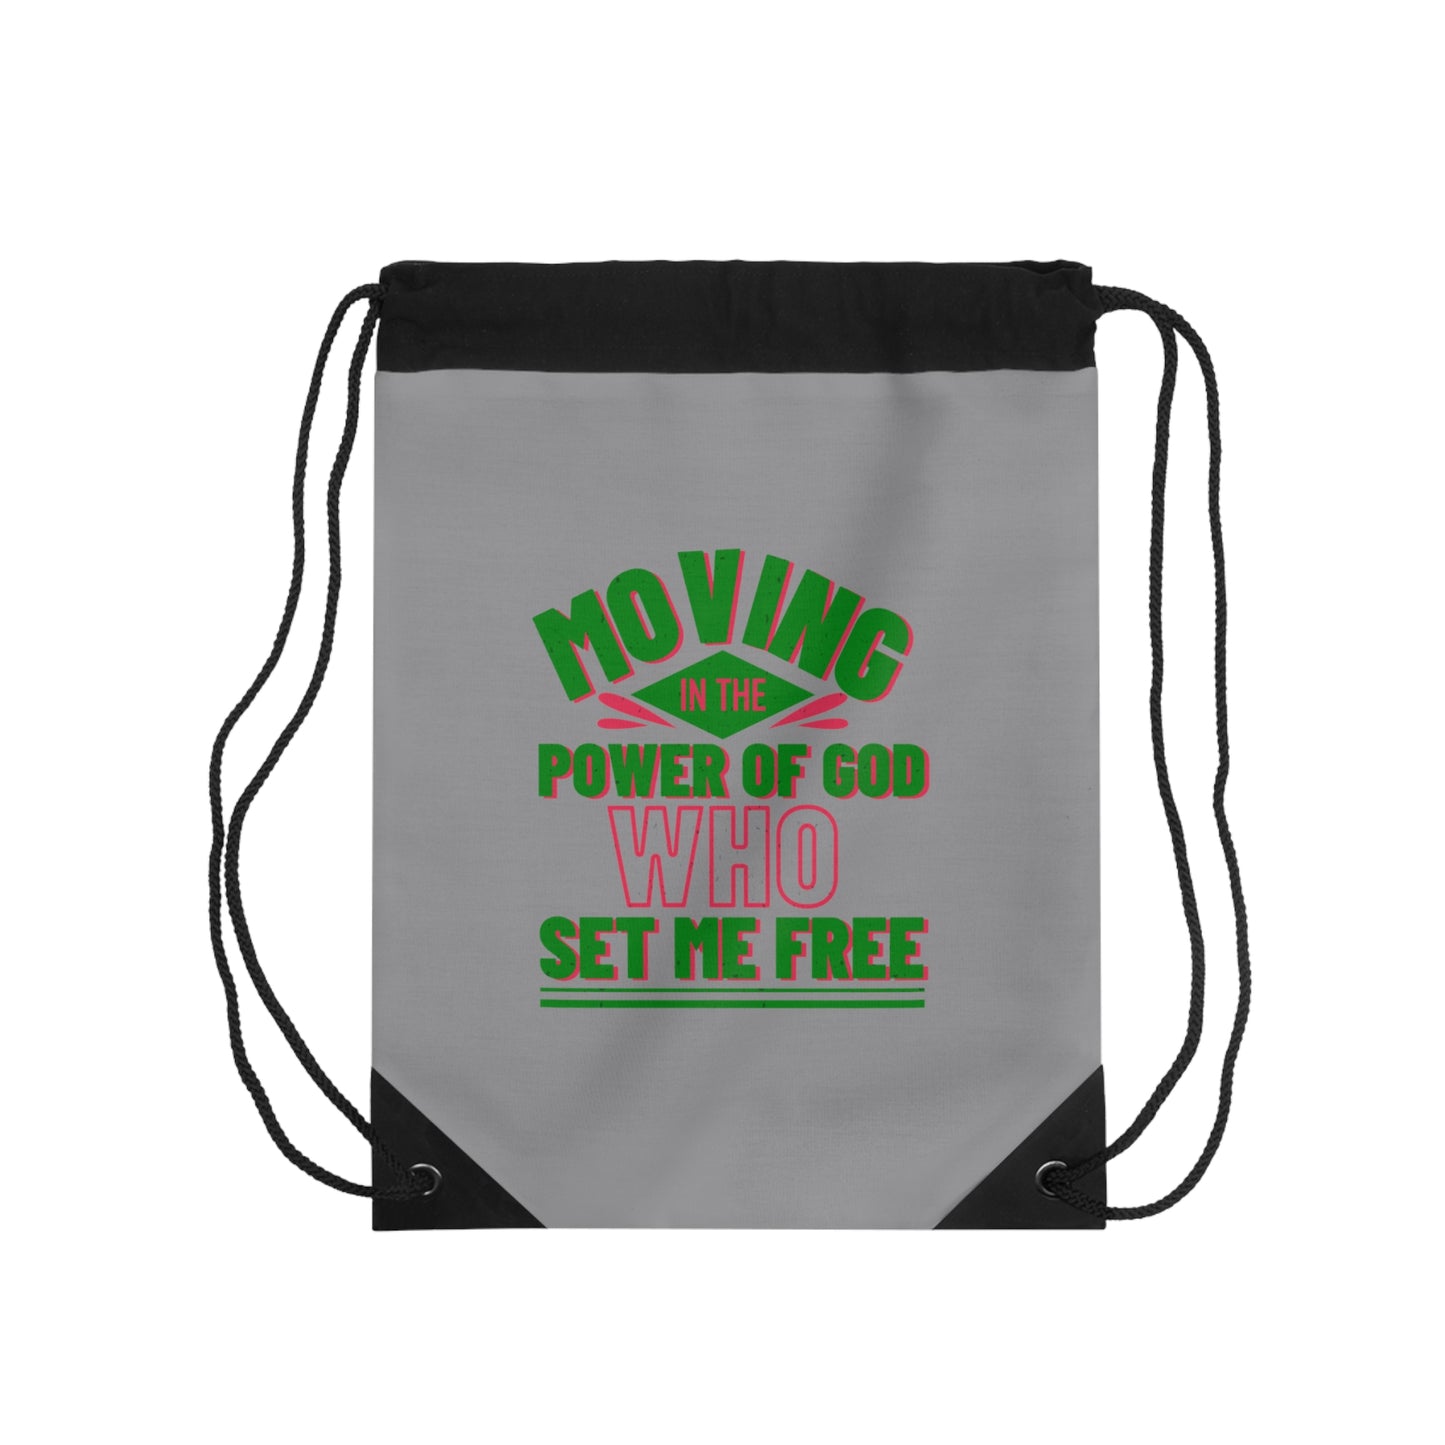 Moving In The Power Of God Who Set Me Free Drawstring Bag